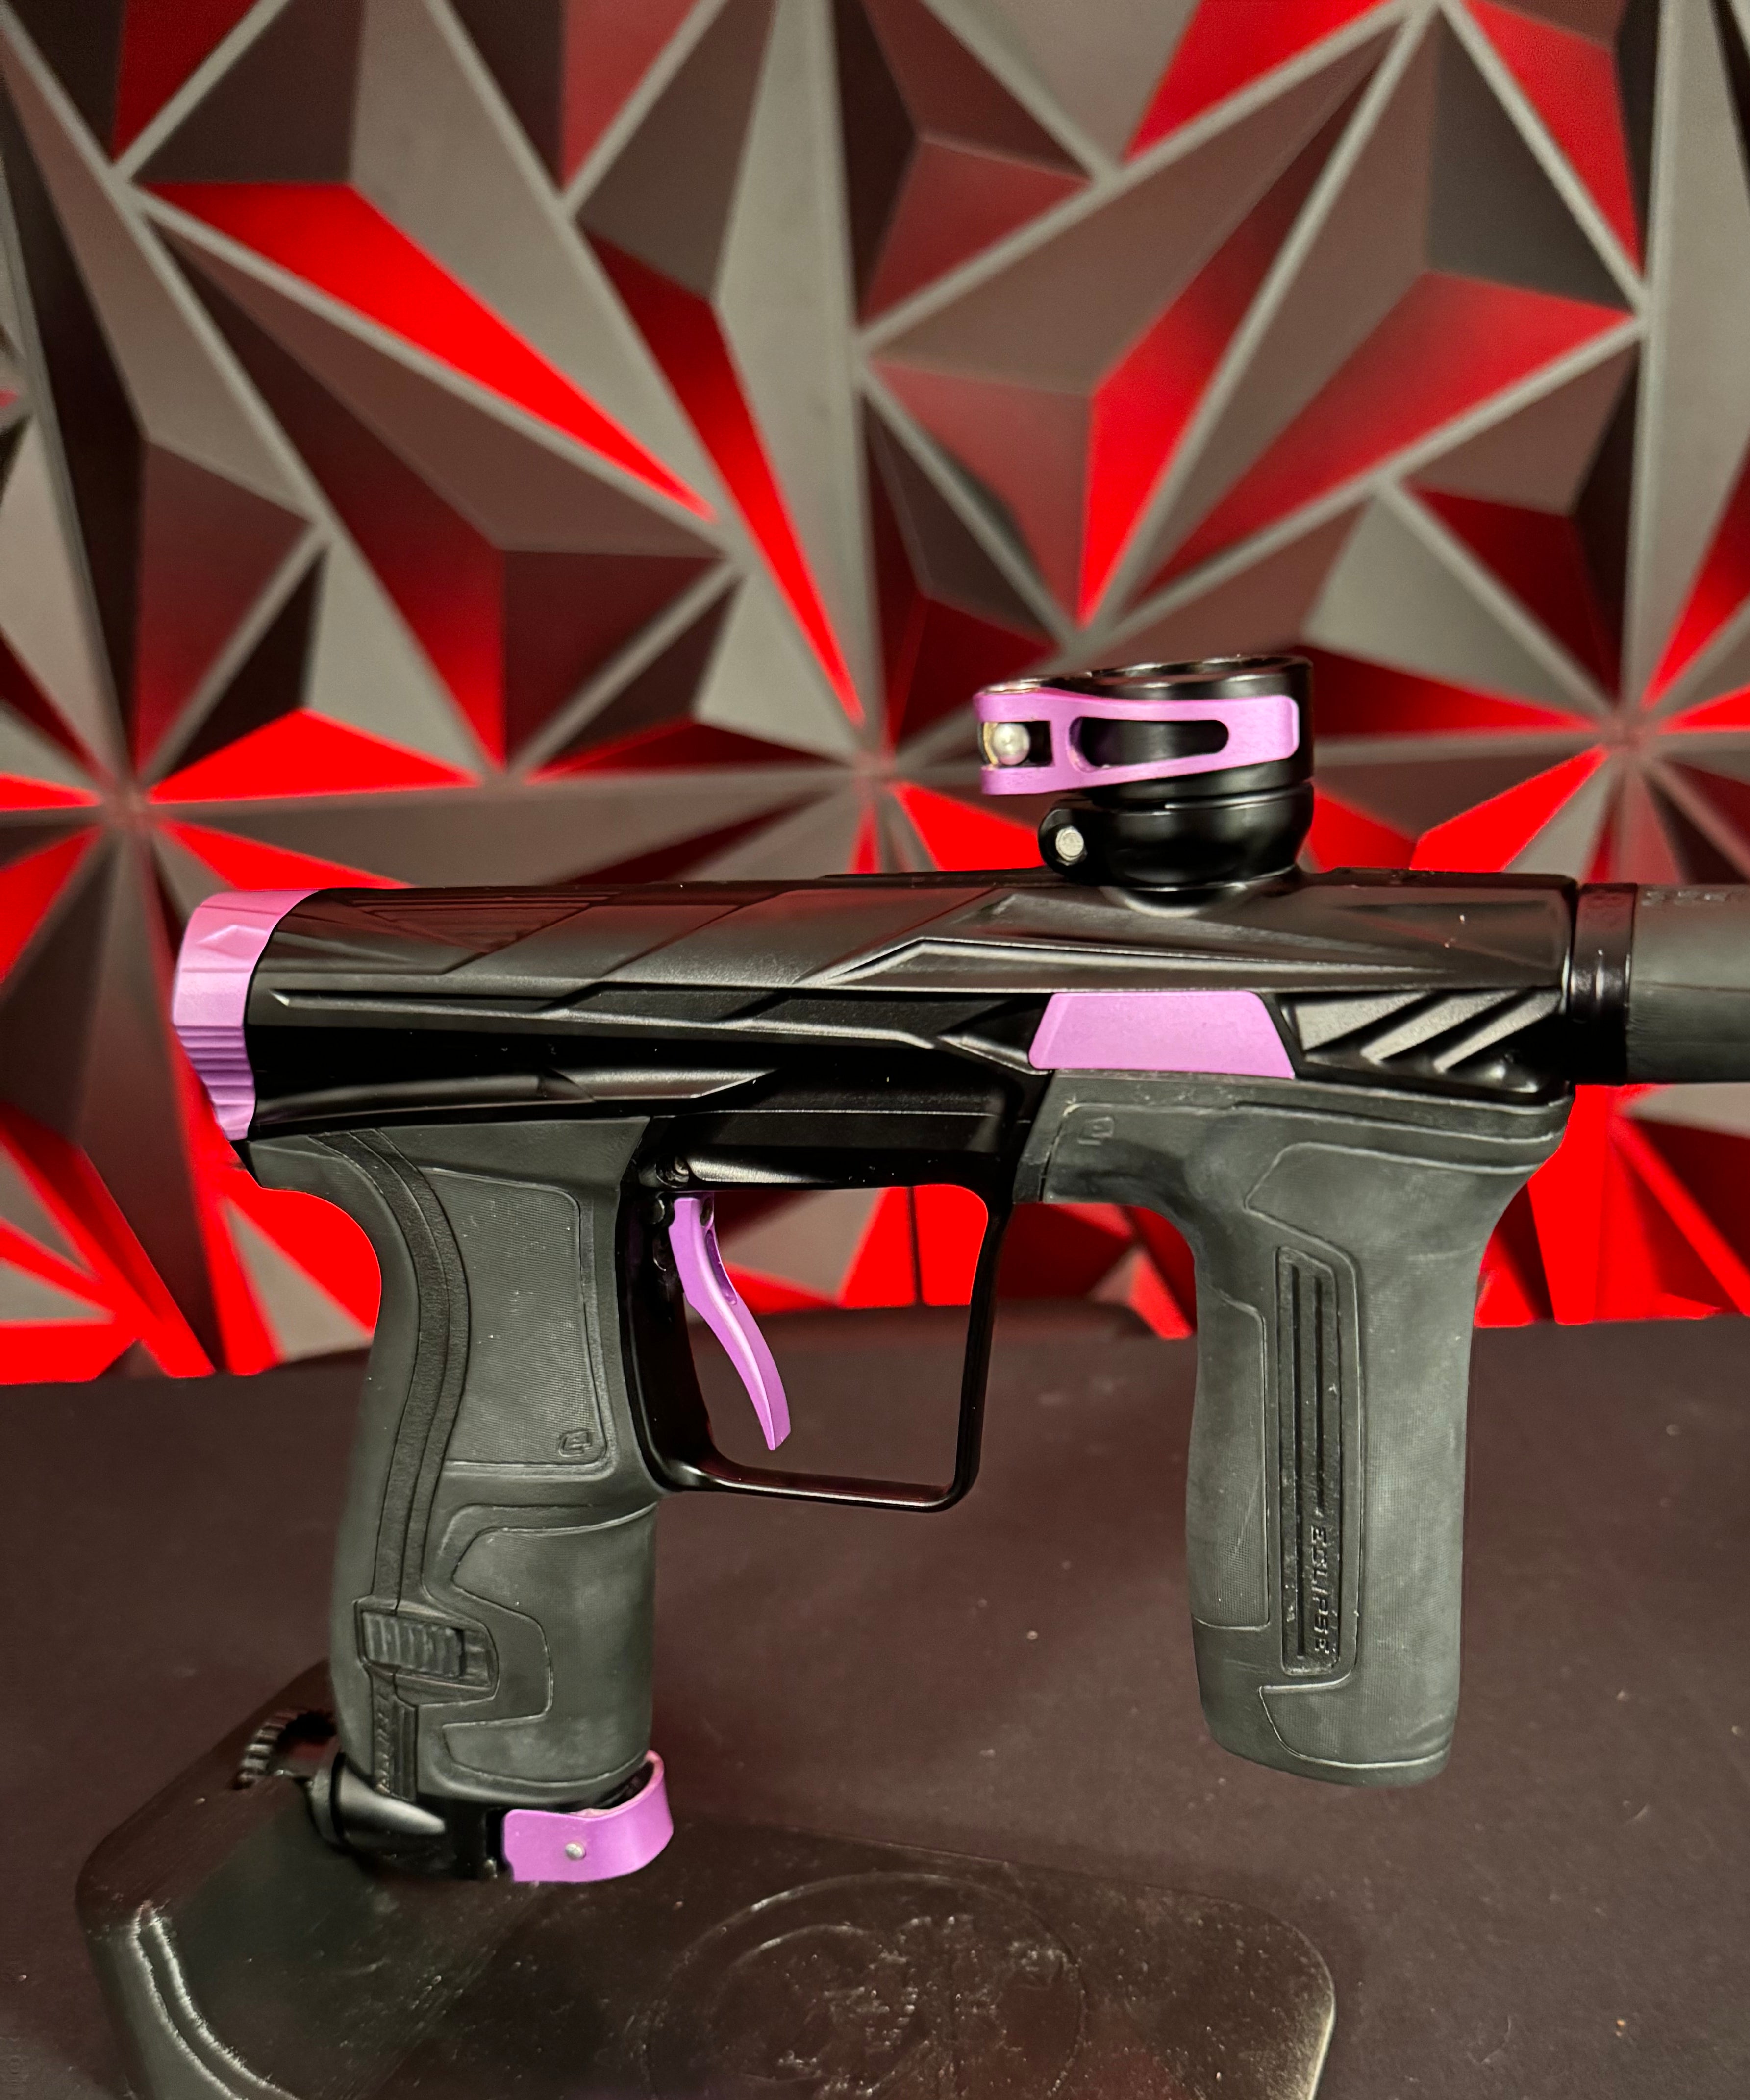 Used Planet Eclipse/HK Army CS2 Invader Paintball Gun - Black/Pink